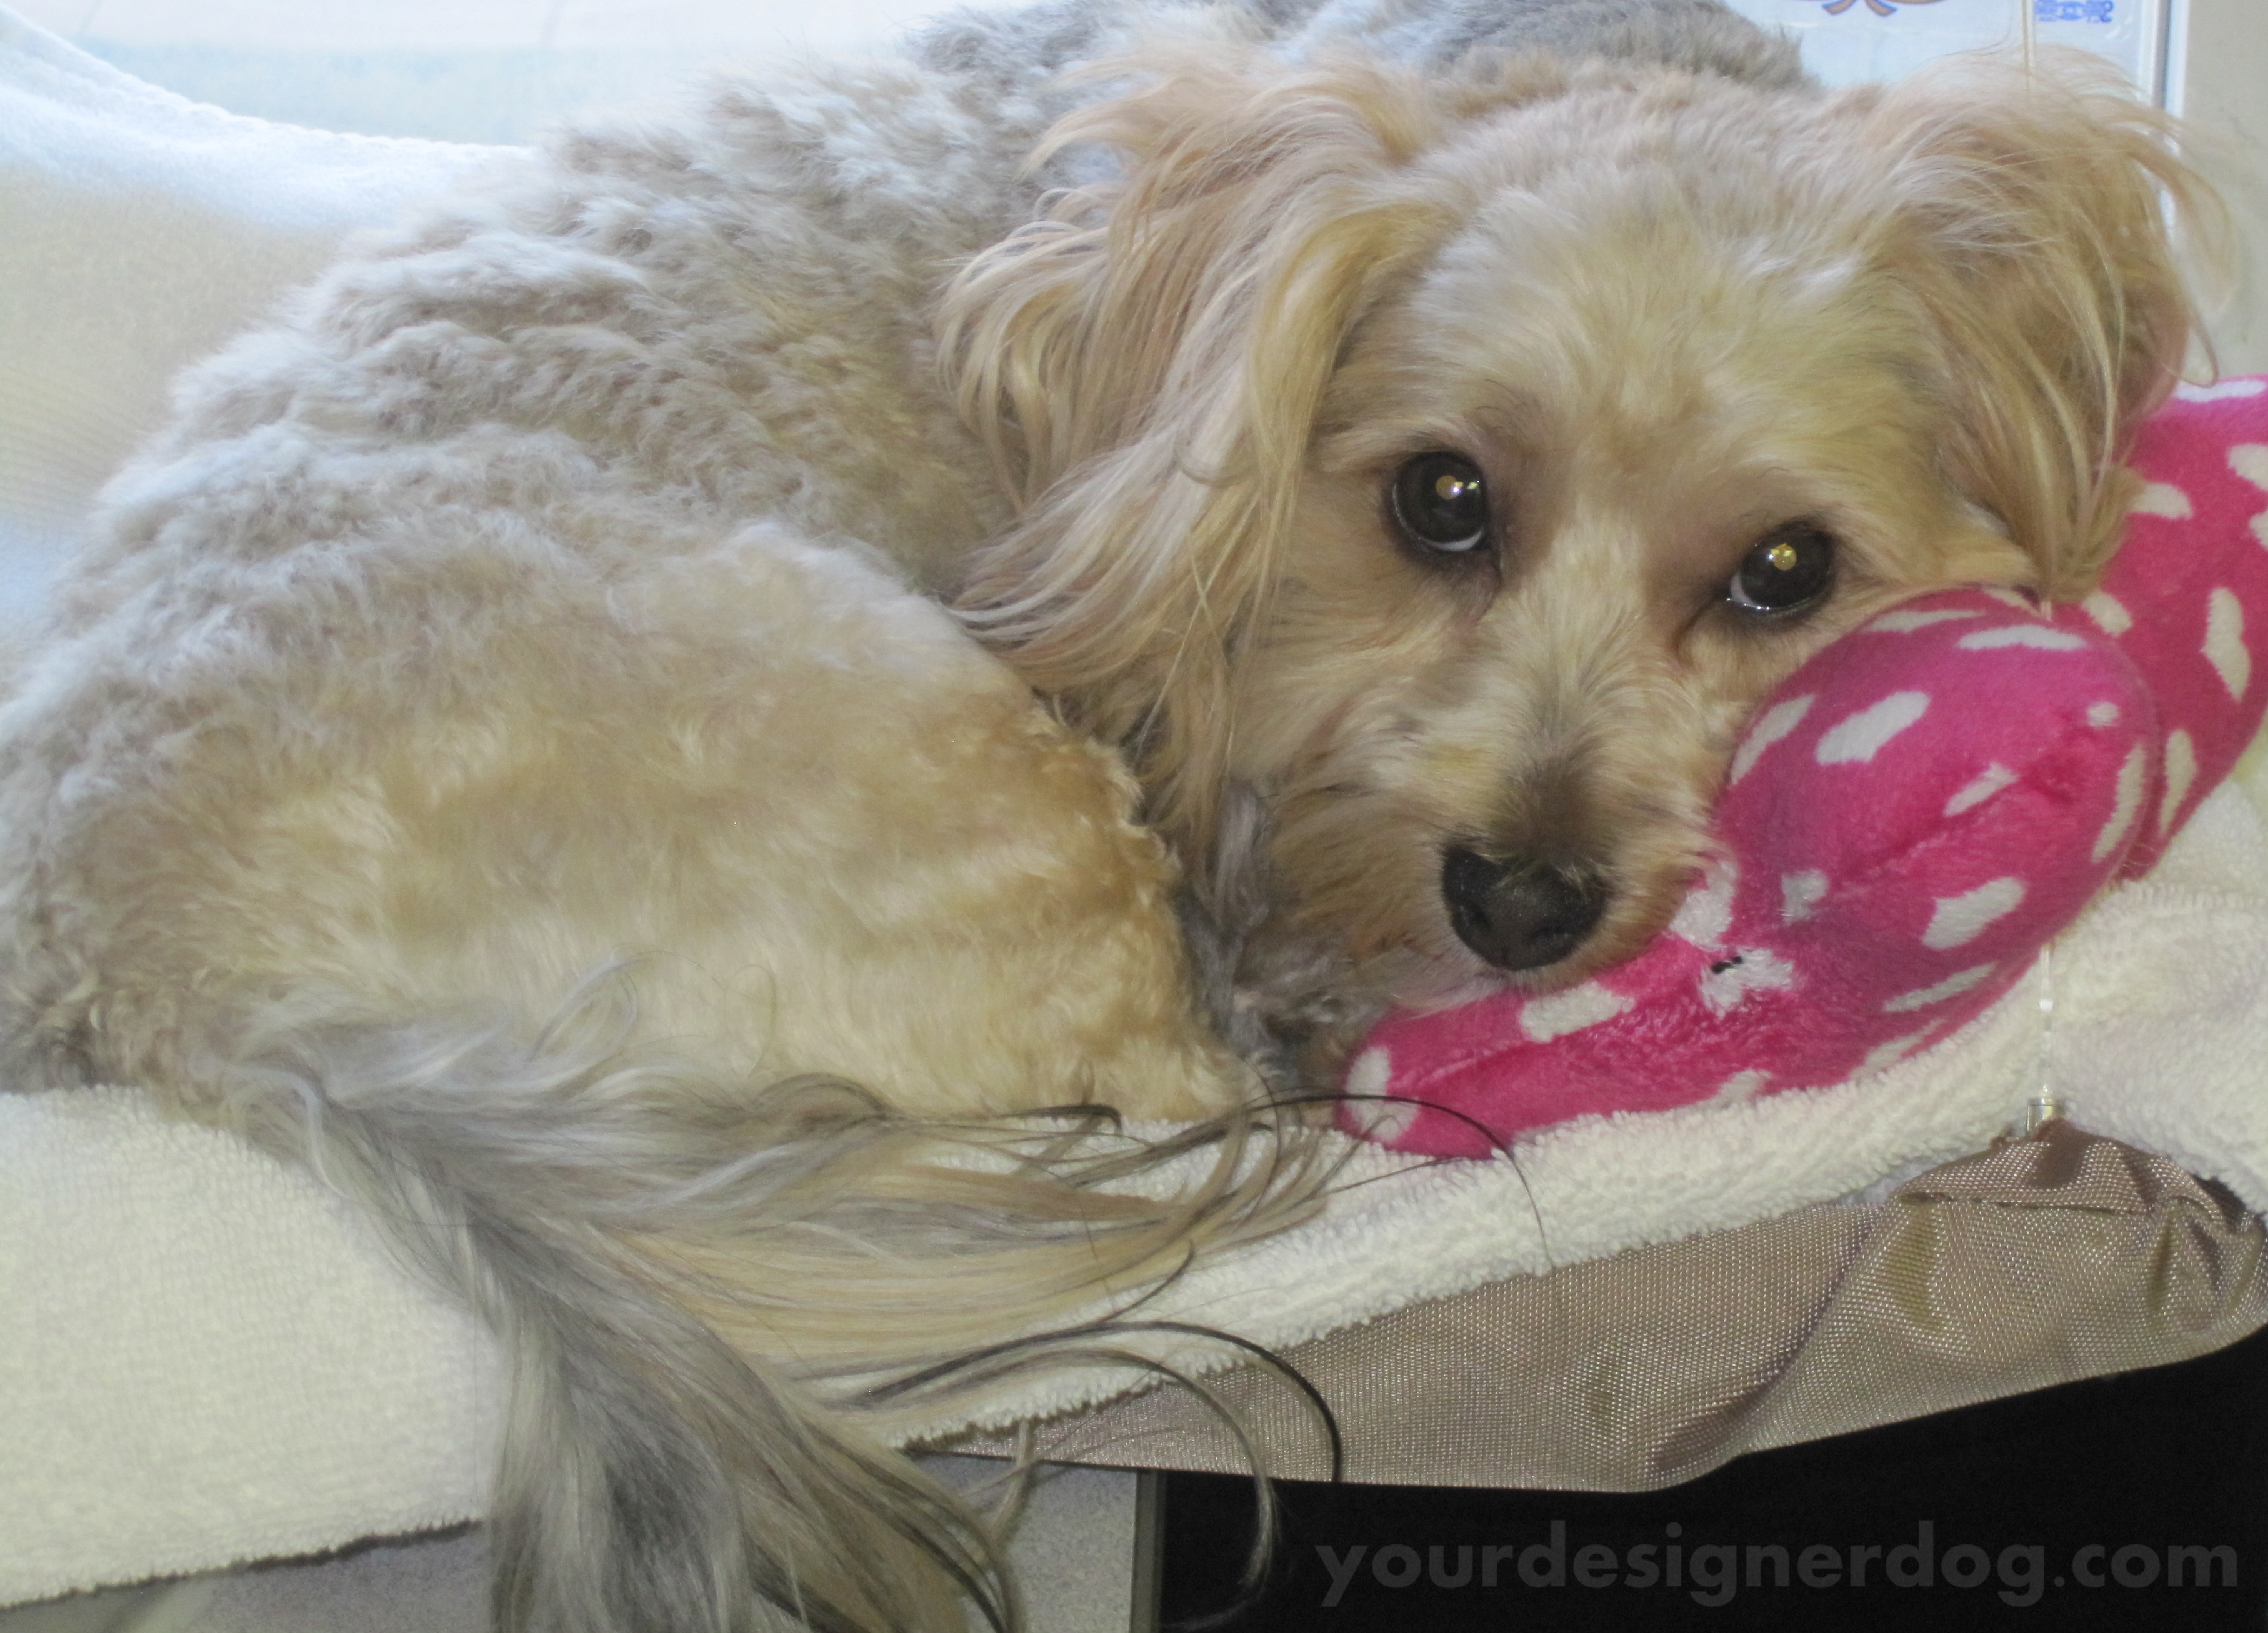 dogs, designer dogs, yorkipoo, yorkie poo, sleepy puppy, curled up